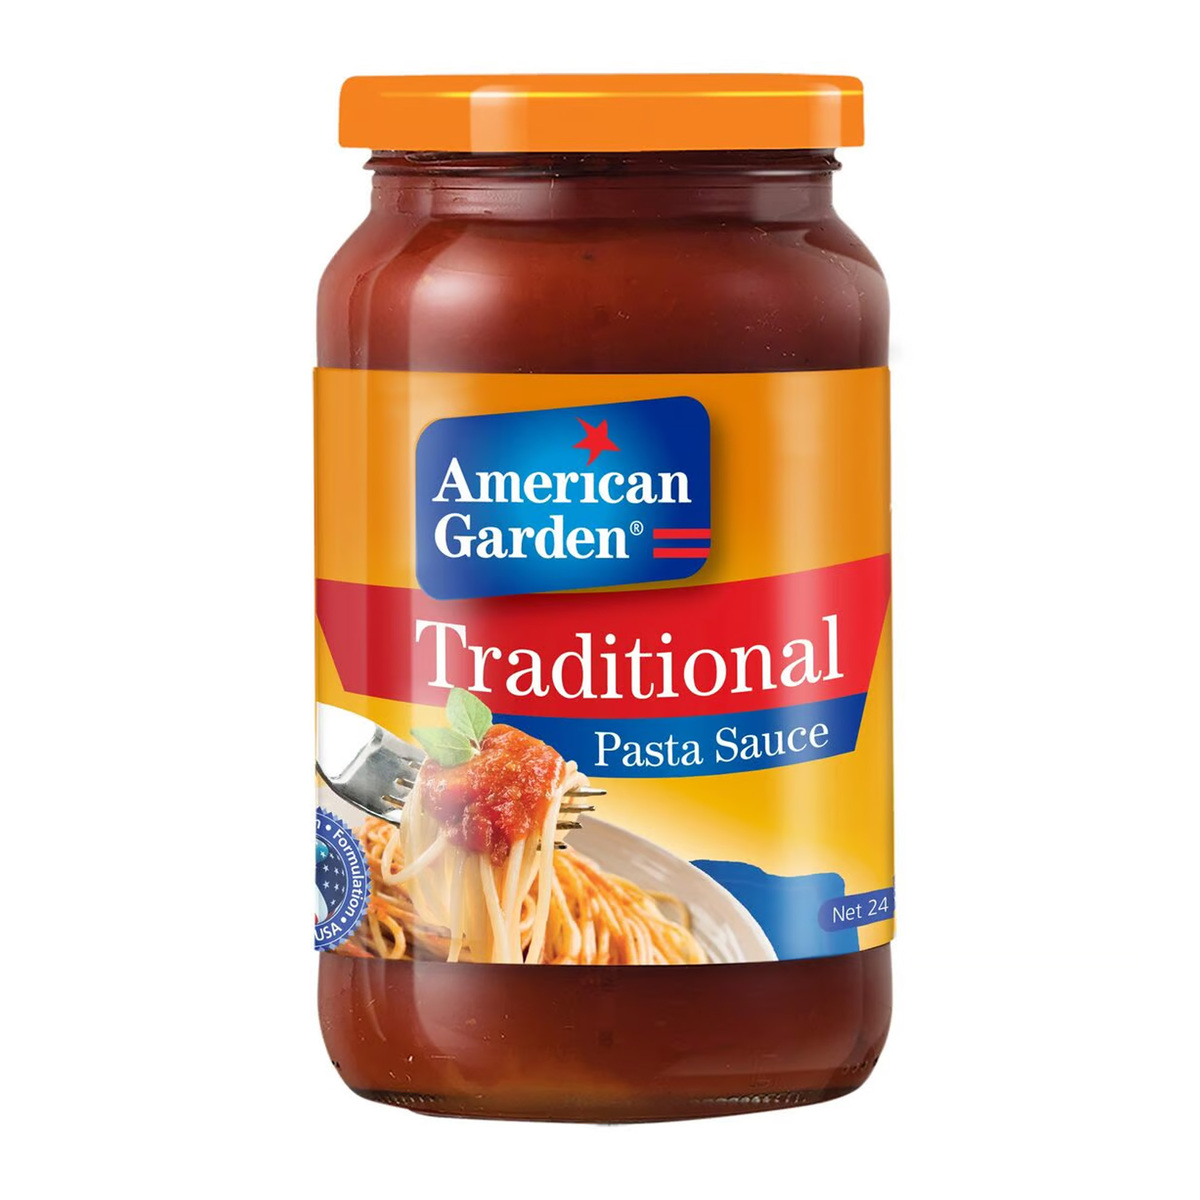 American Garden Traditional Pasta Sauce Value Pack 24 oz